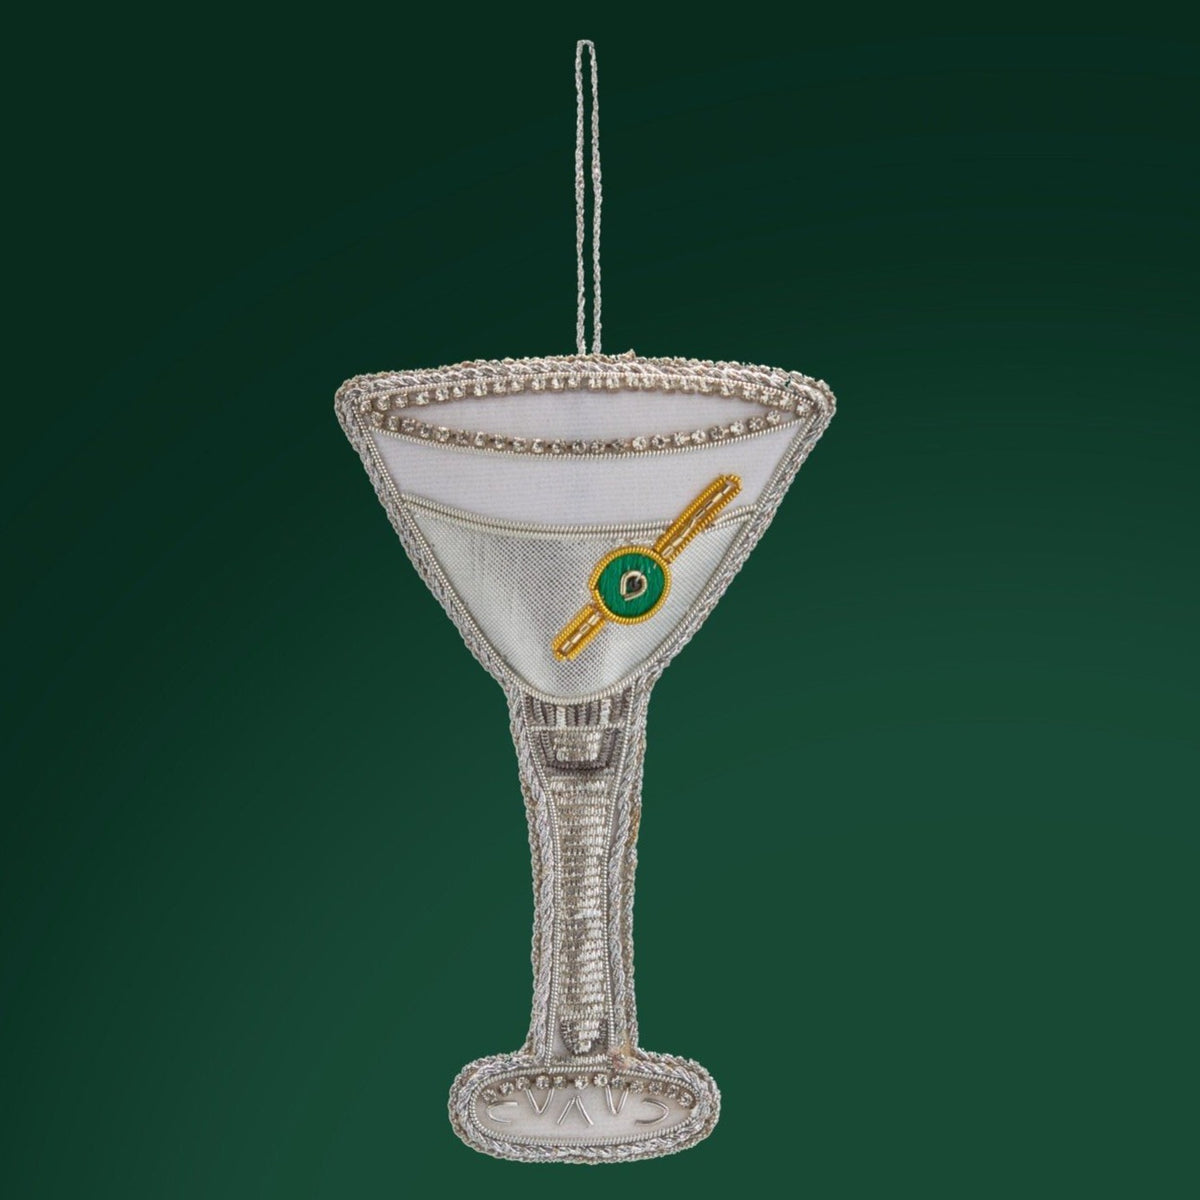 007 Christmas Decoration - Silver Lurex Martini Glass with Olive DECORATION Tinker Tailor 